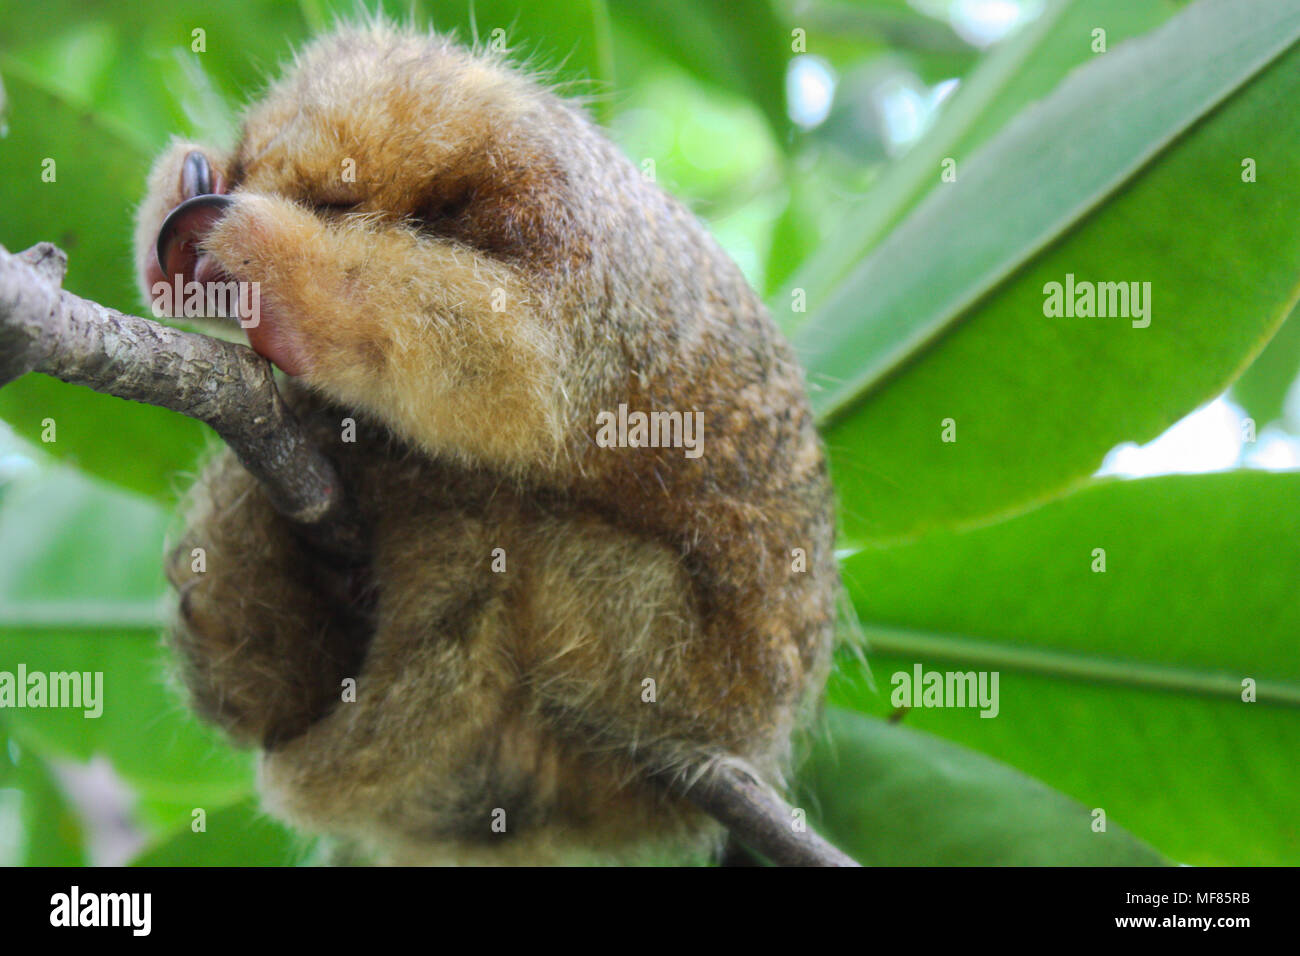 Cuddly anteater sleeping in tree branch. Stock Photo